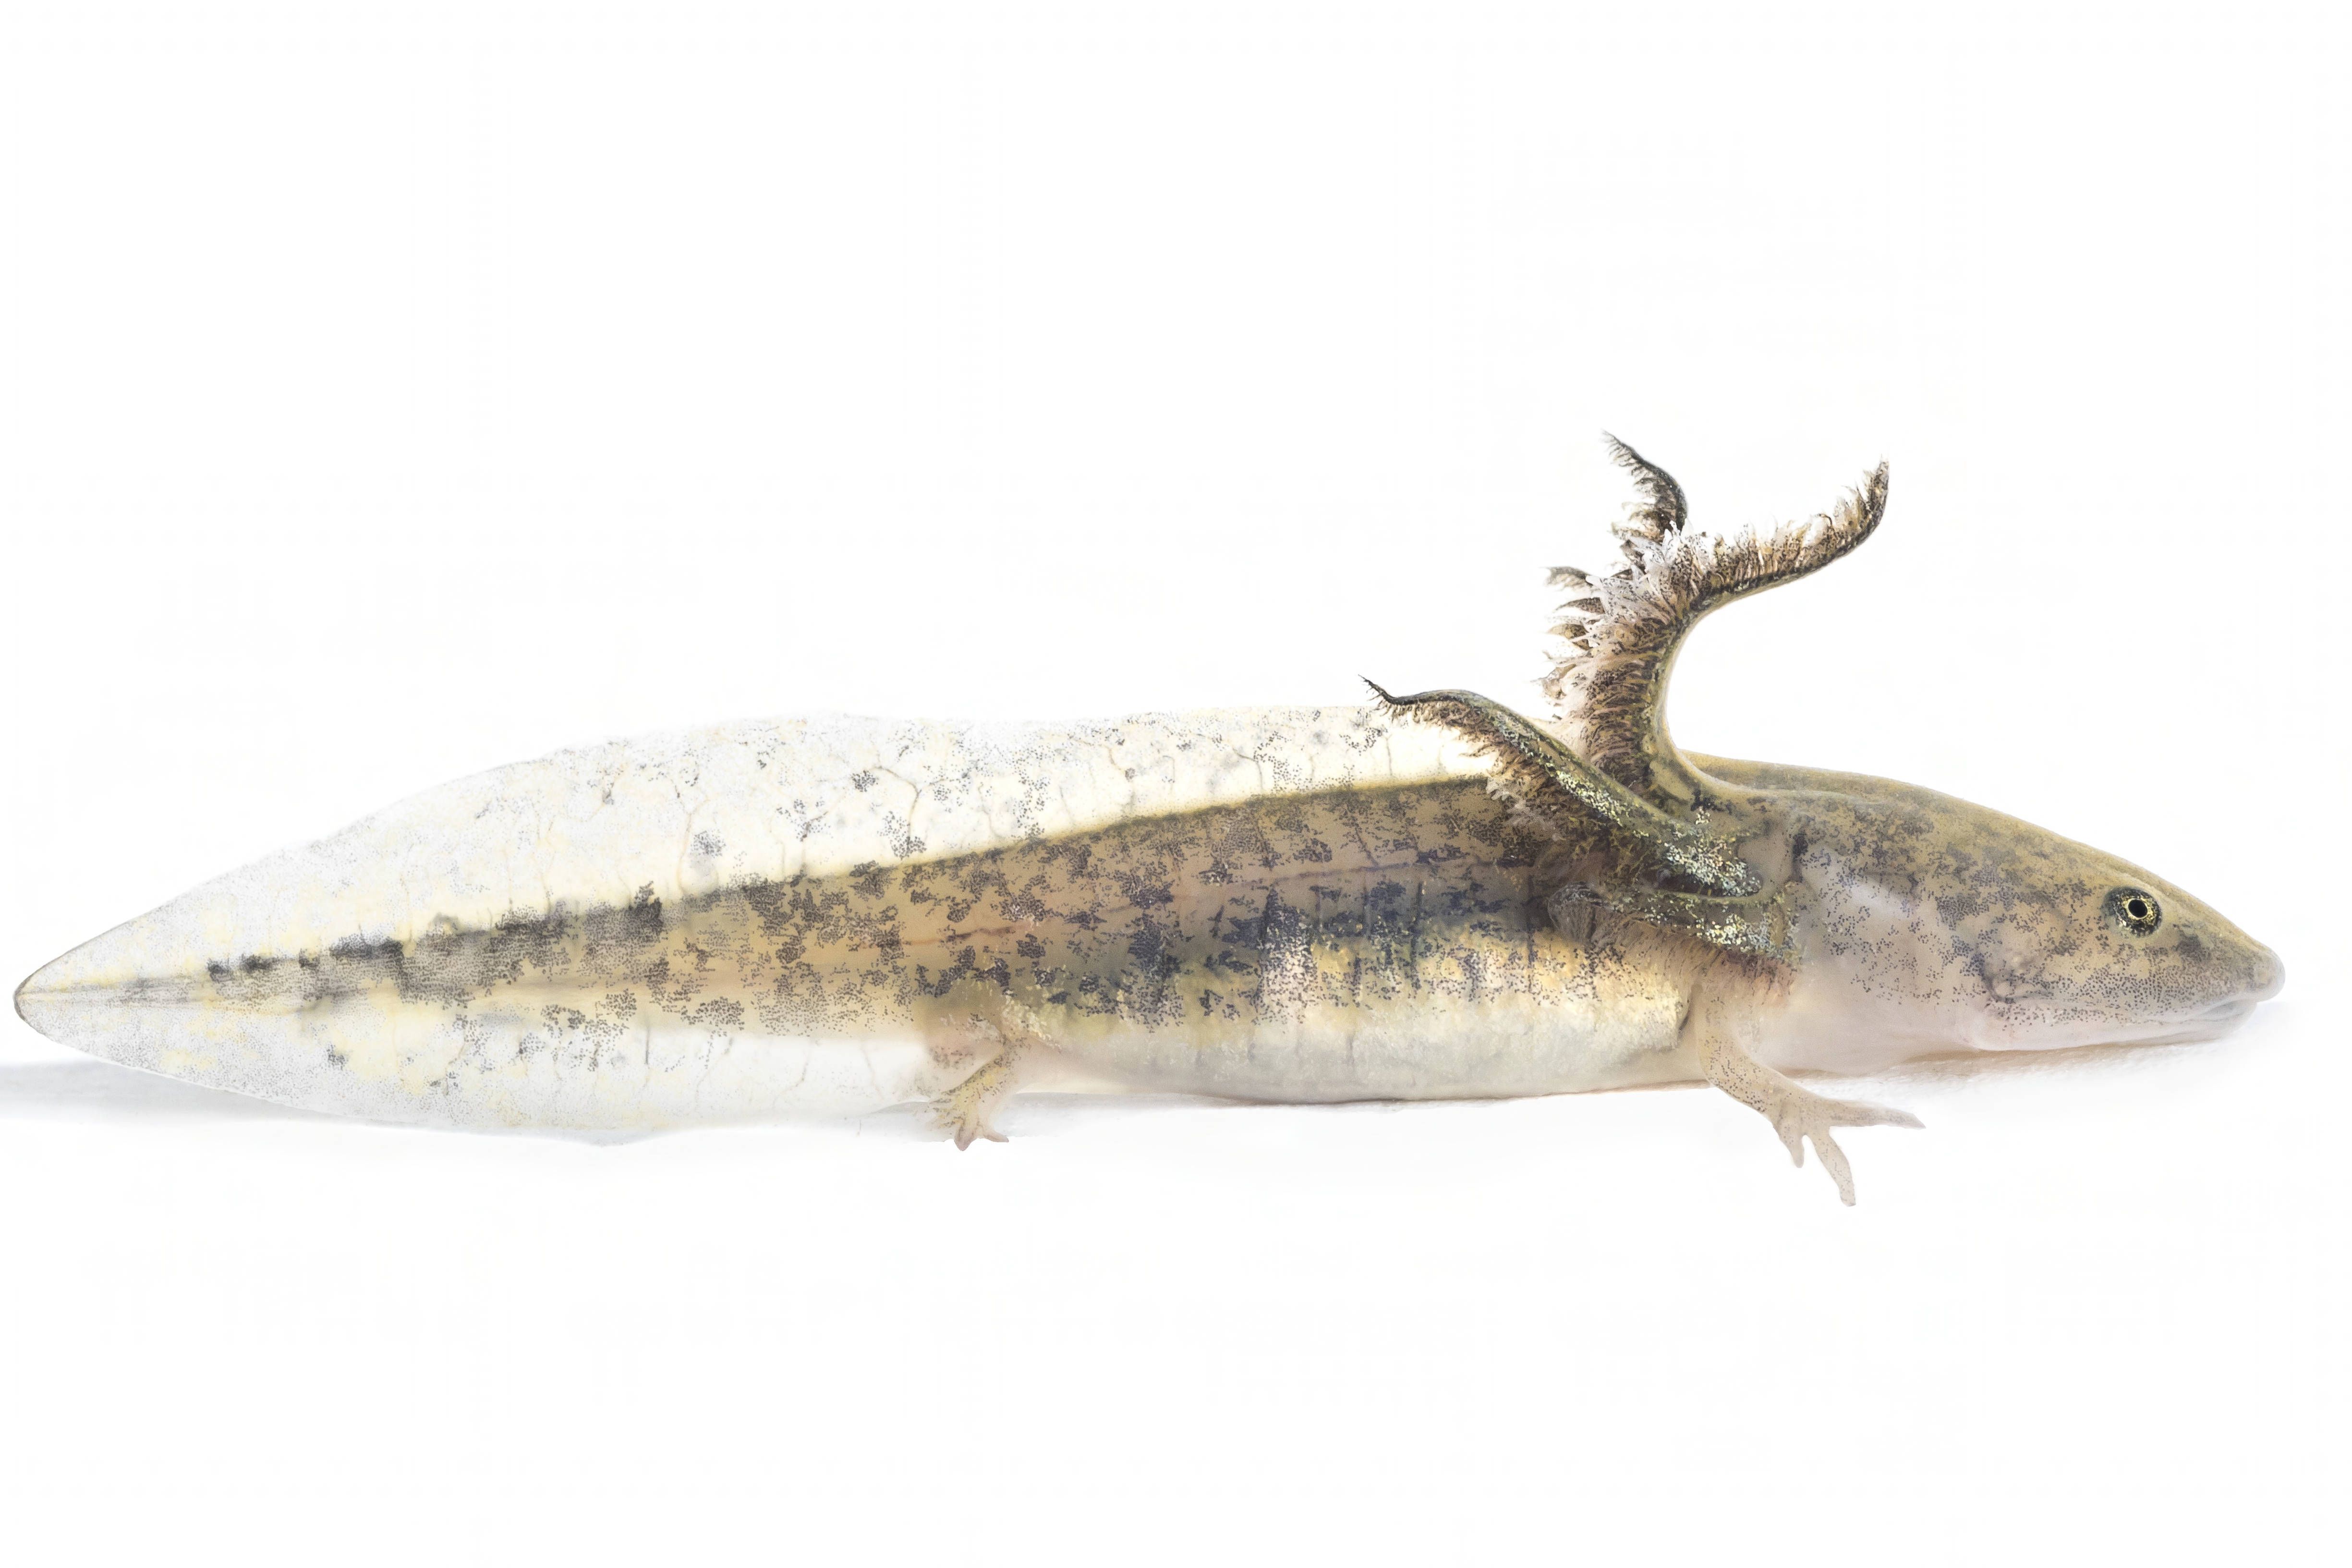 Scientists trying to save ancient salamander